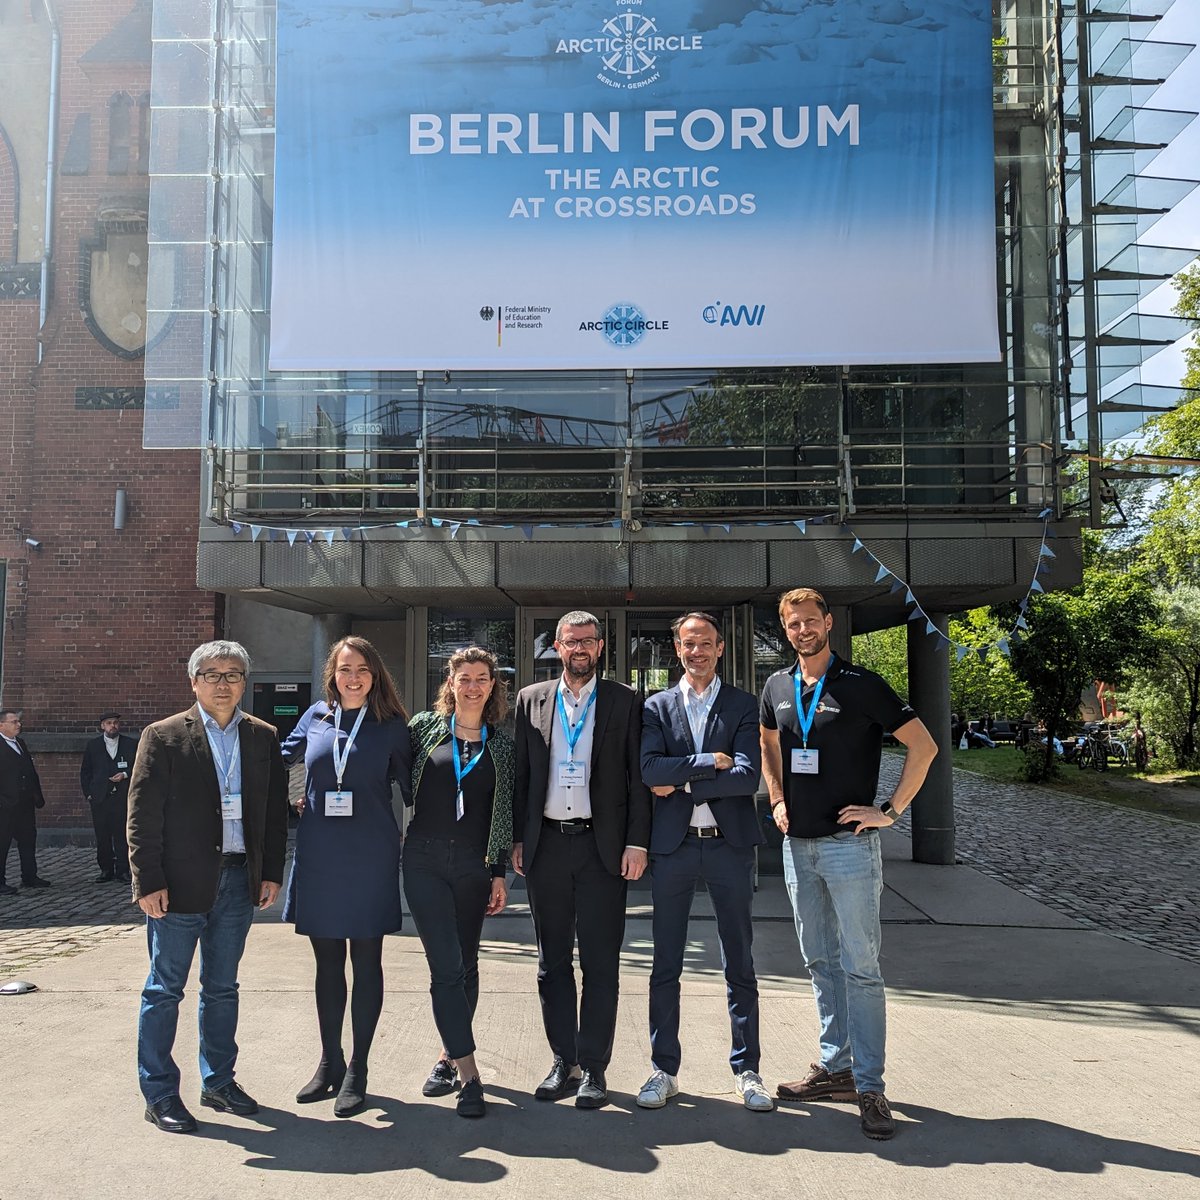 Besides Arctic research, policy and health, the Arctic Circle Berlin Forum is about vibrant exchanges among professionals in polar and ocean-related fields, including ministries, scientists, and sailors. ⛵ #teammalizia